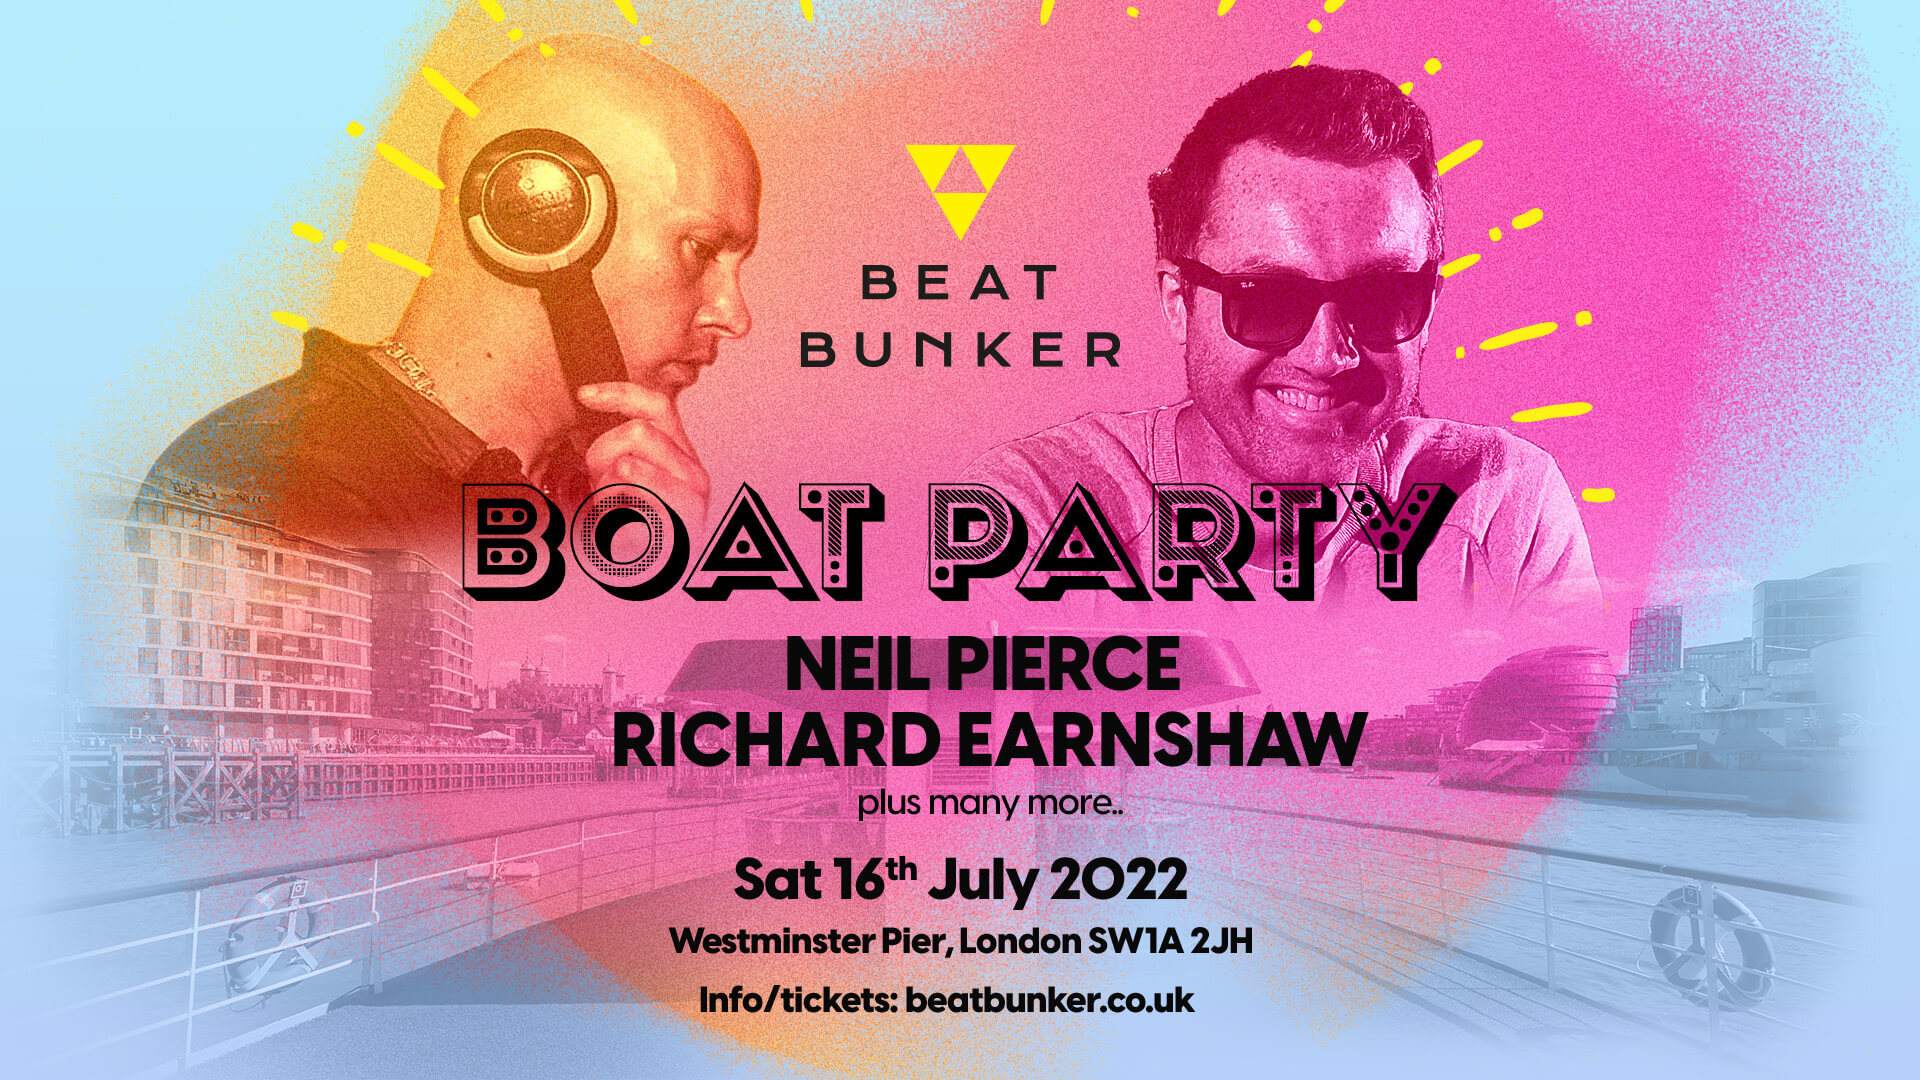 Beat Bunker Summer Boat Party 2022 - フライヤー表